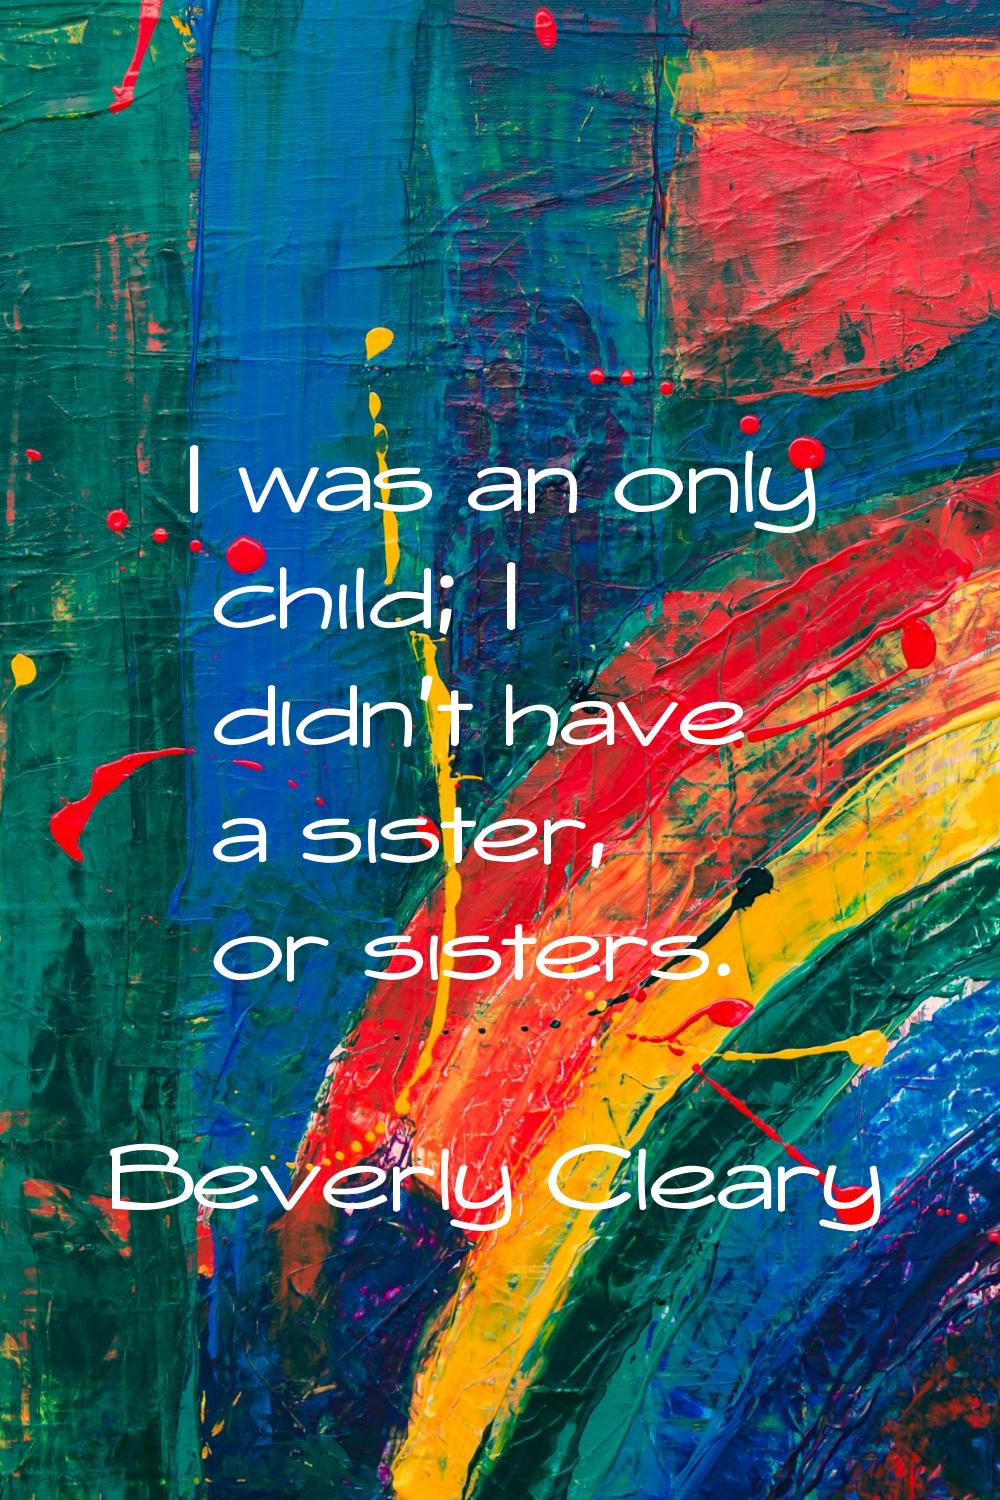 I was an only child; I didn't have a sister, or sisters.